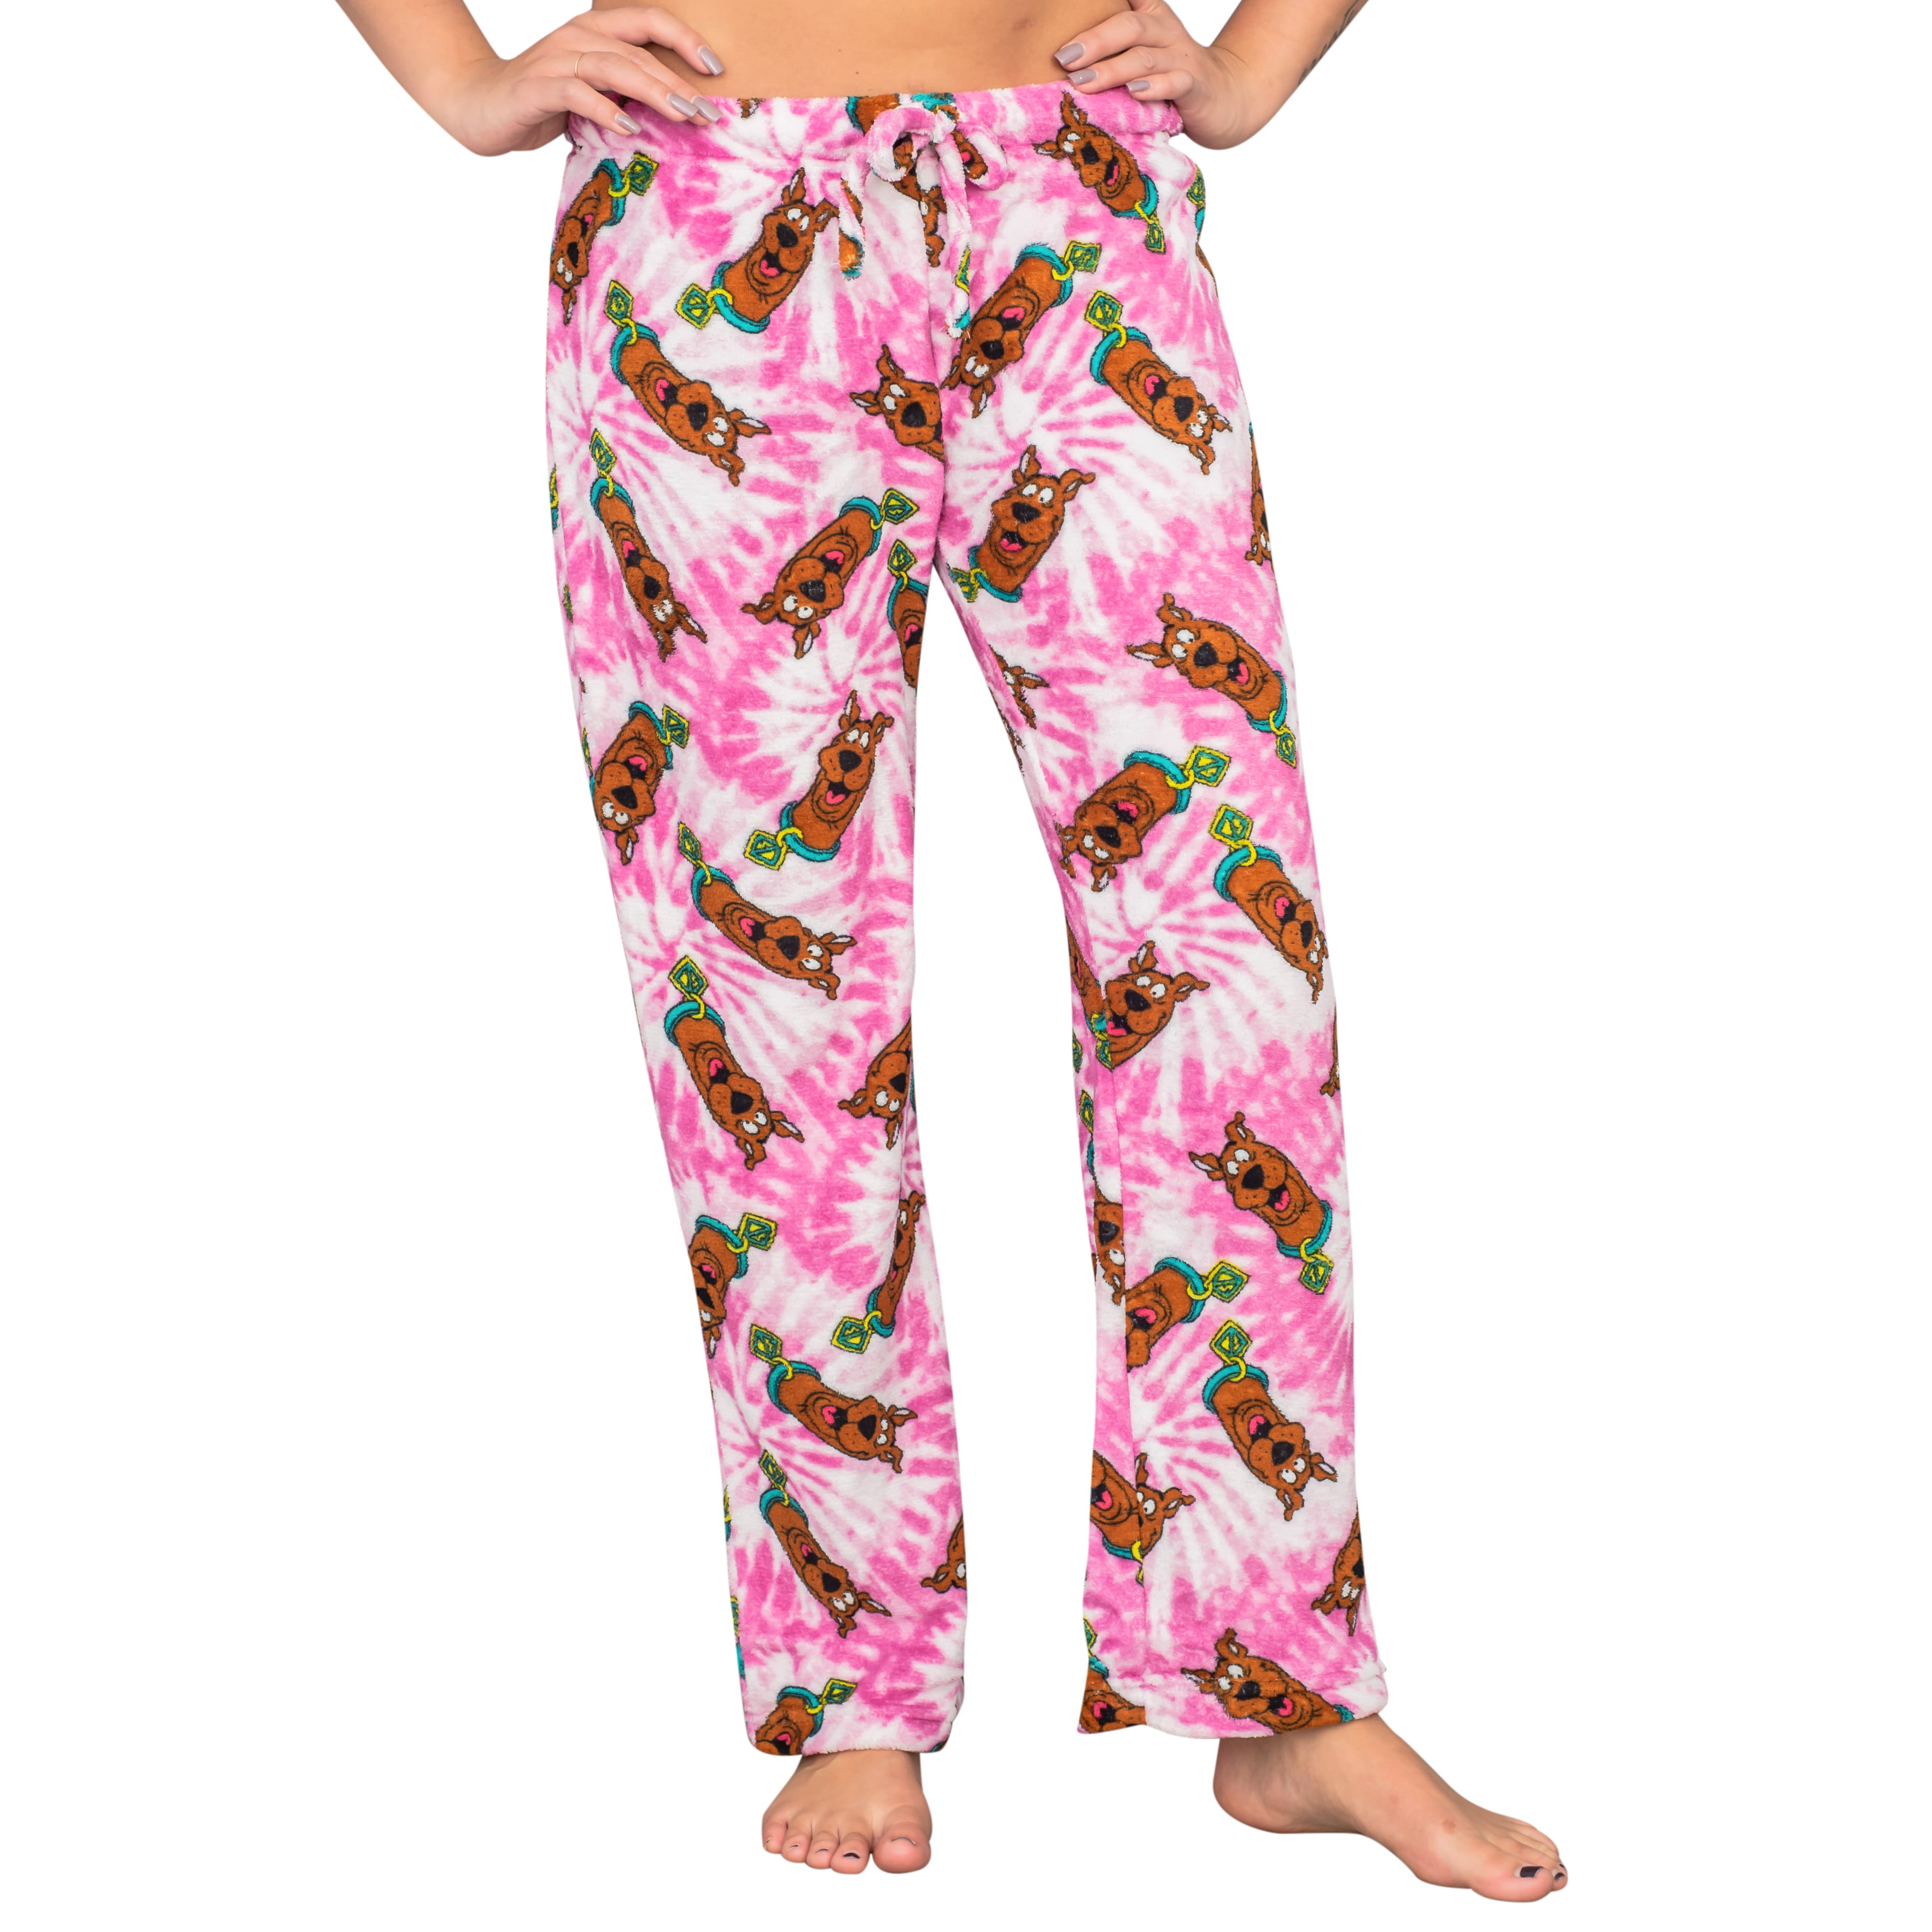 Adult Women's Scooby Doo All Over Pink Tie Dye Plush Lounge Pants